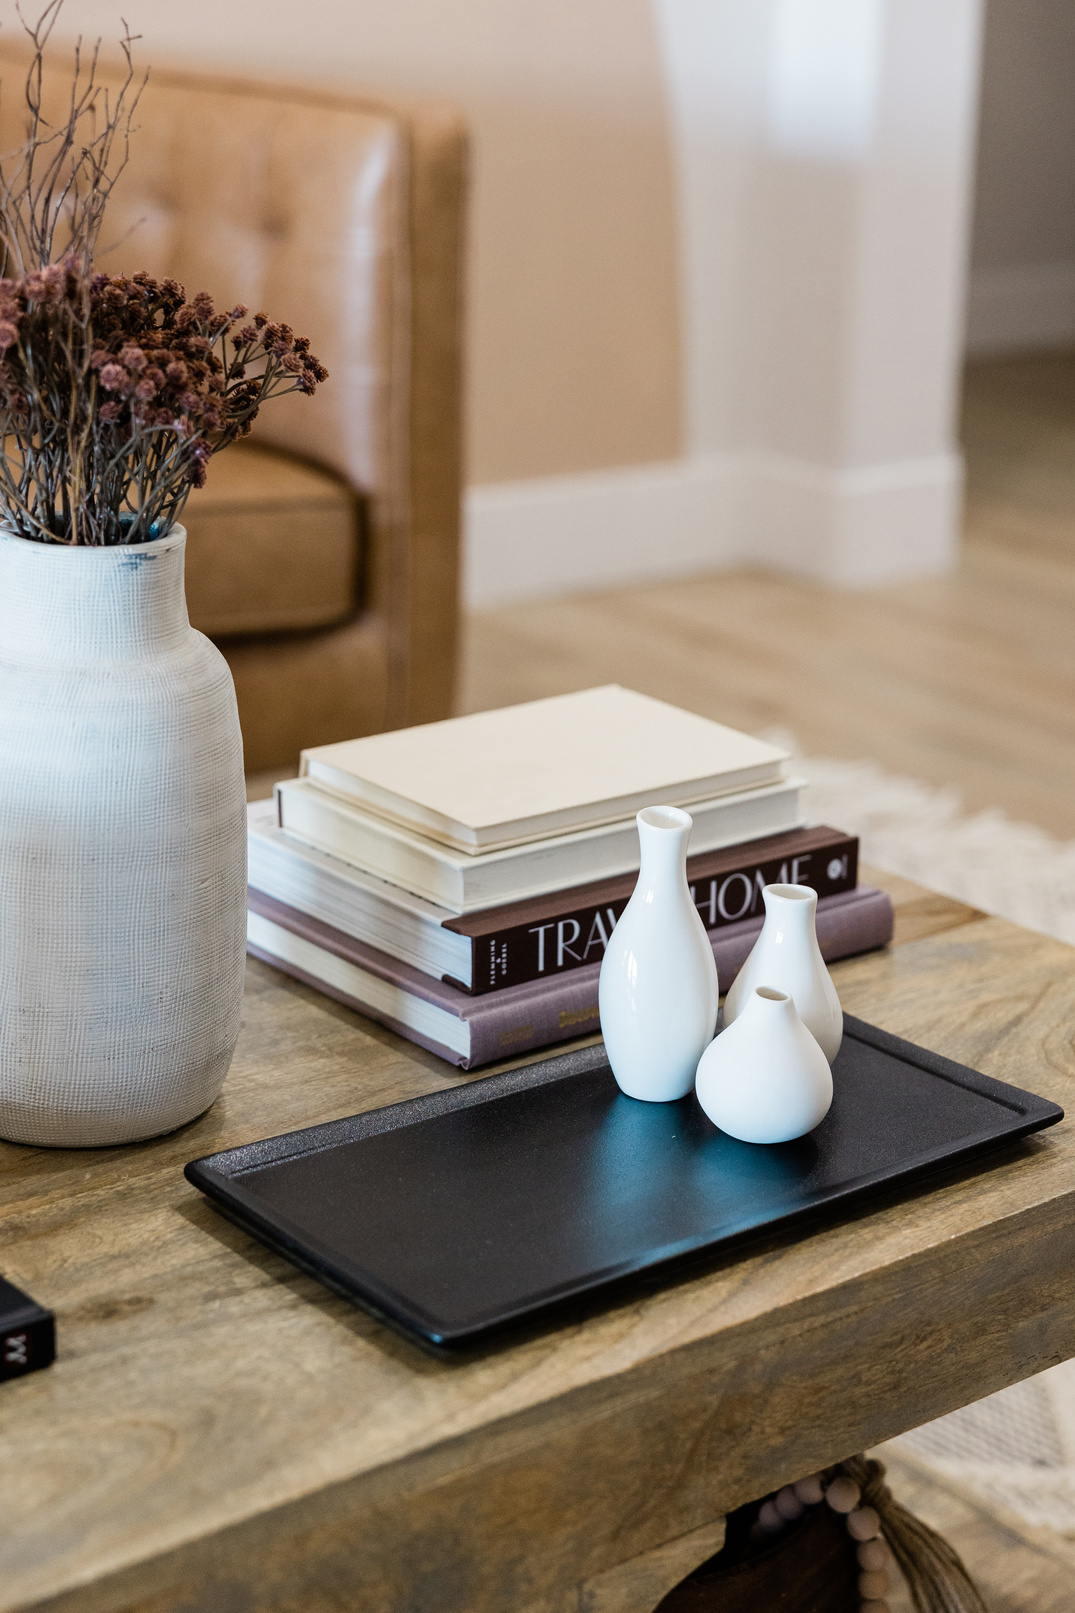 Vase, Books, and Decorative Jars on the Coffee Table